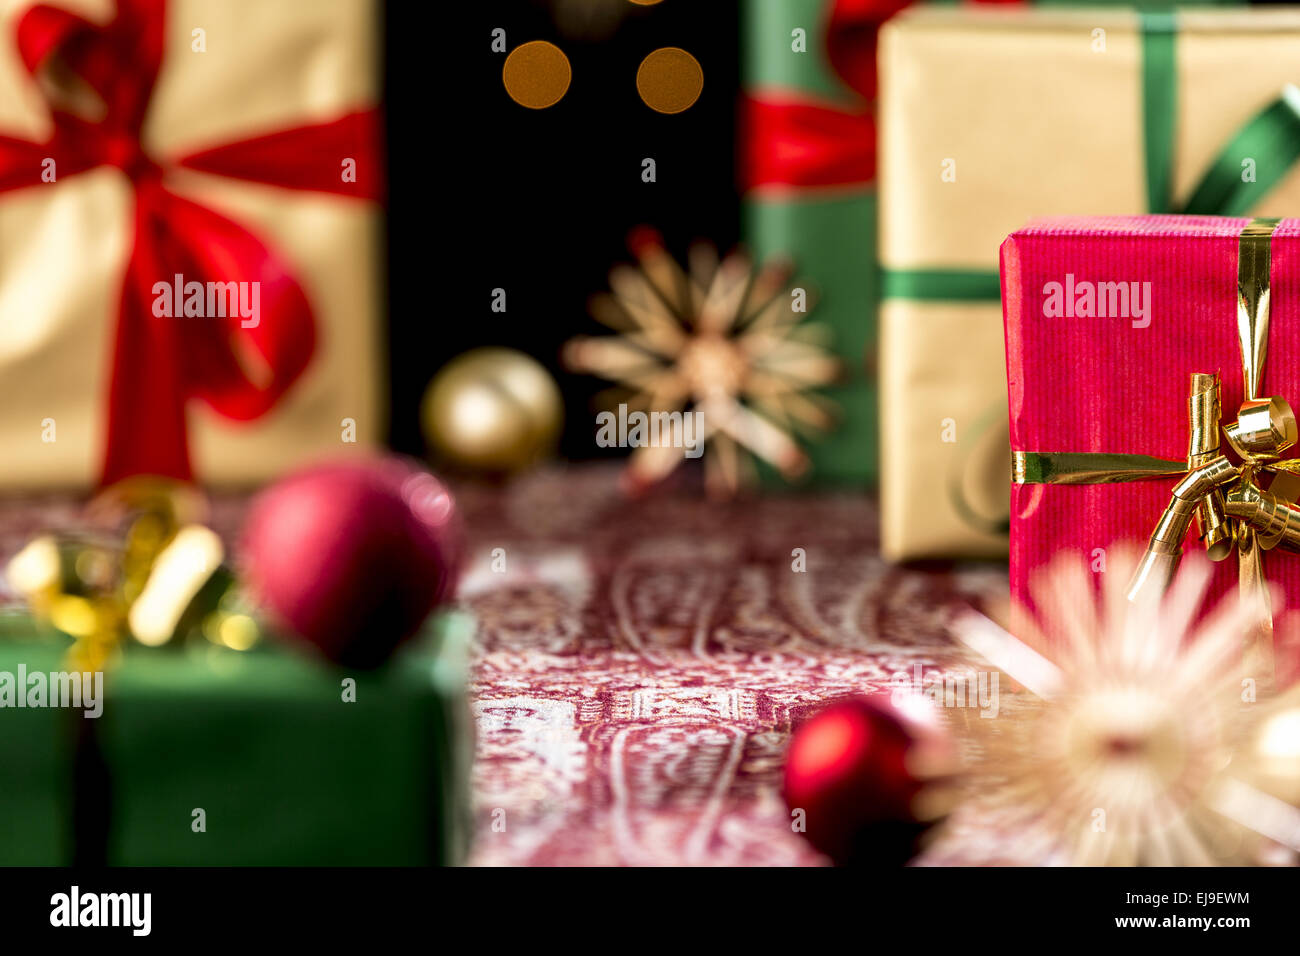 Christmas Gifts Placed on a Festive Cloth Stock Photo